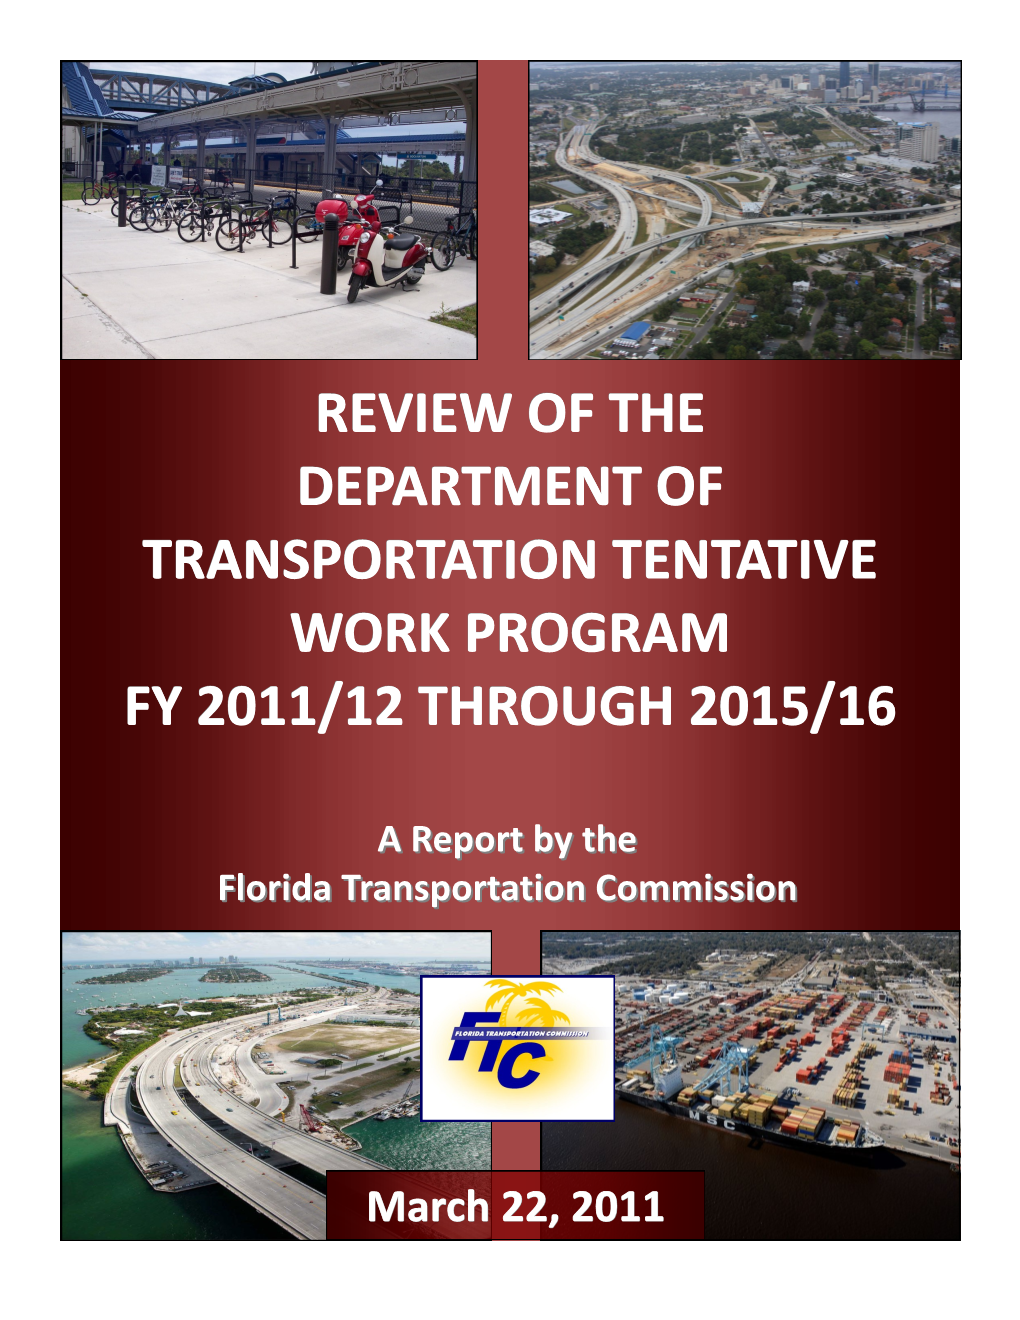 Review of the Department of Transportation Tentative Work Program Fy 2011/12 Through 2015/16